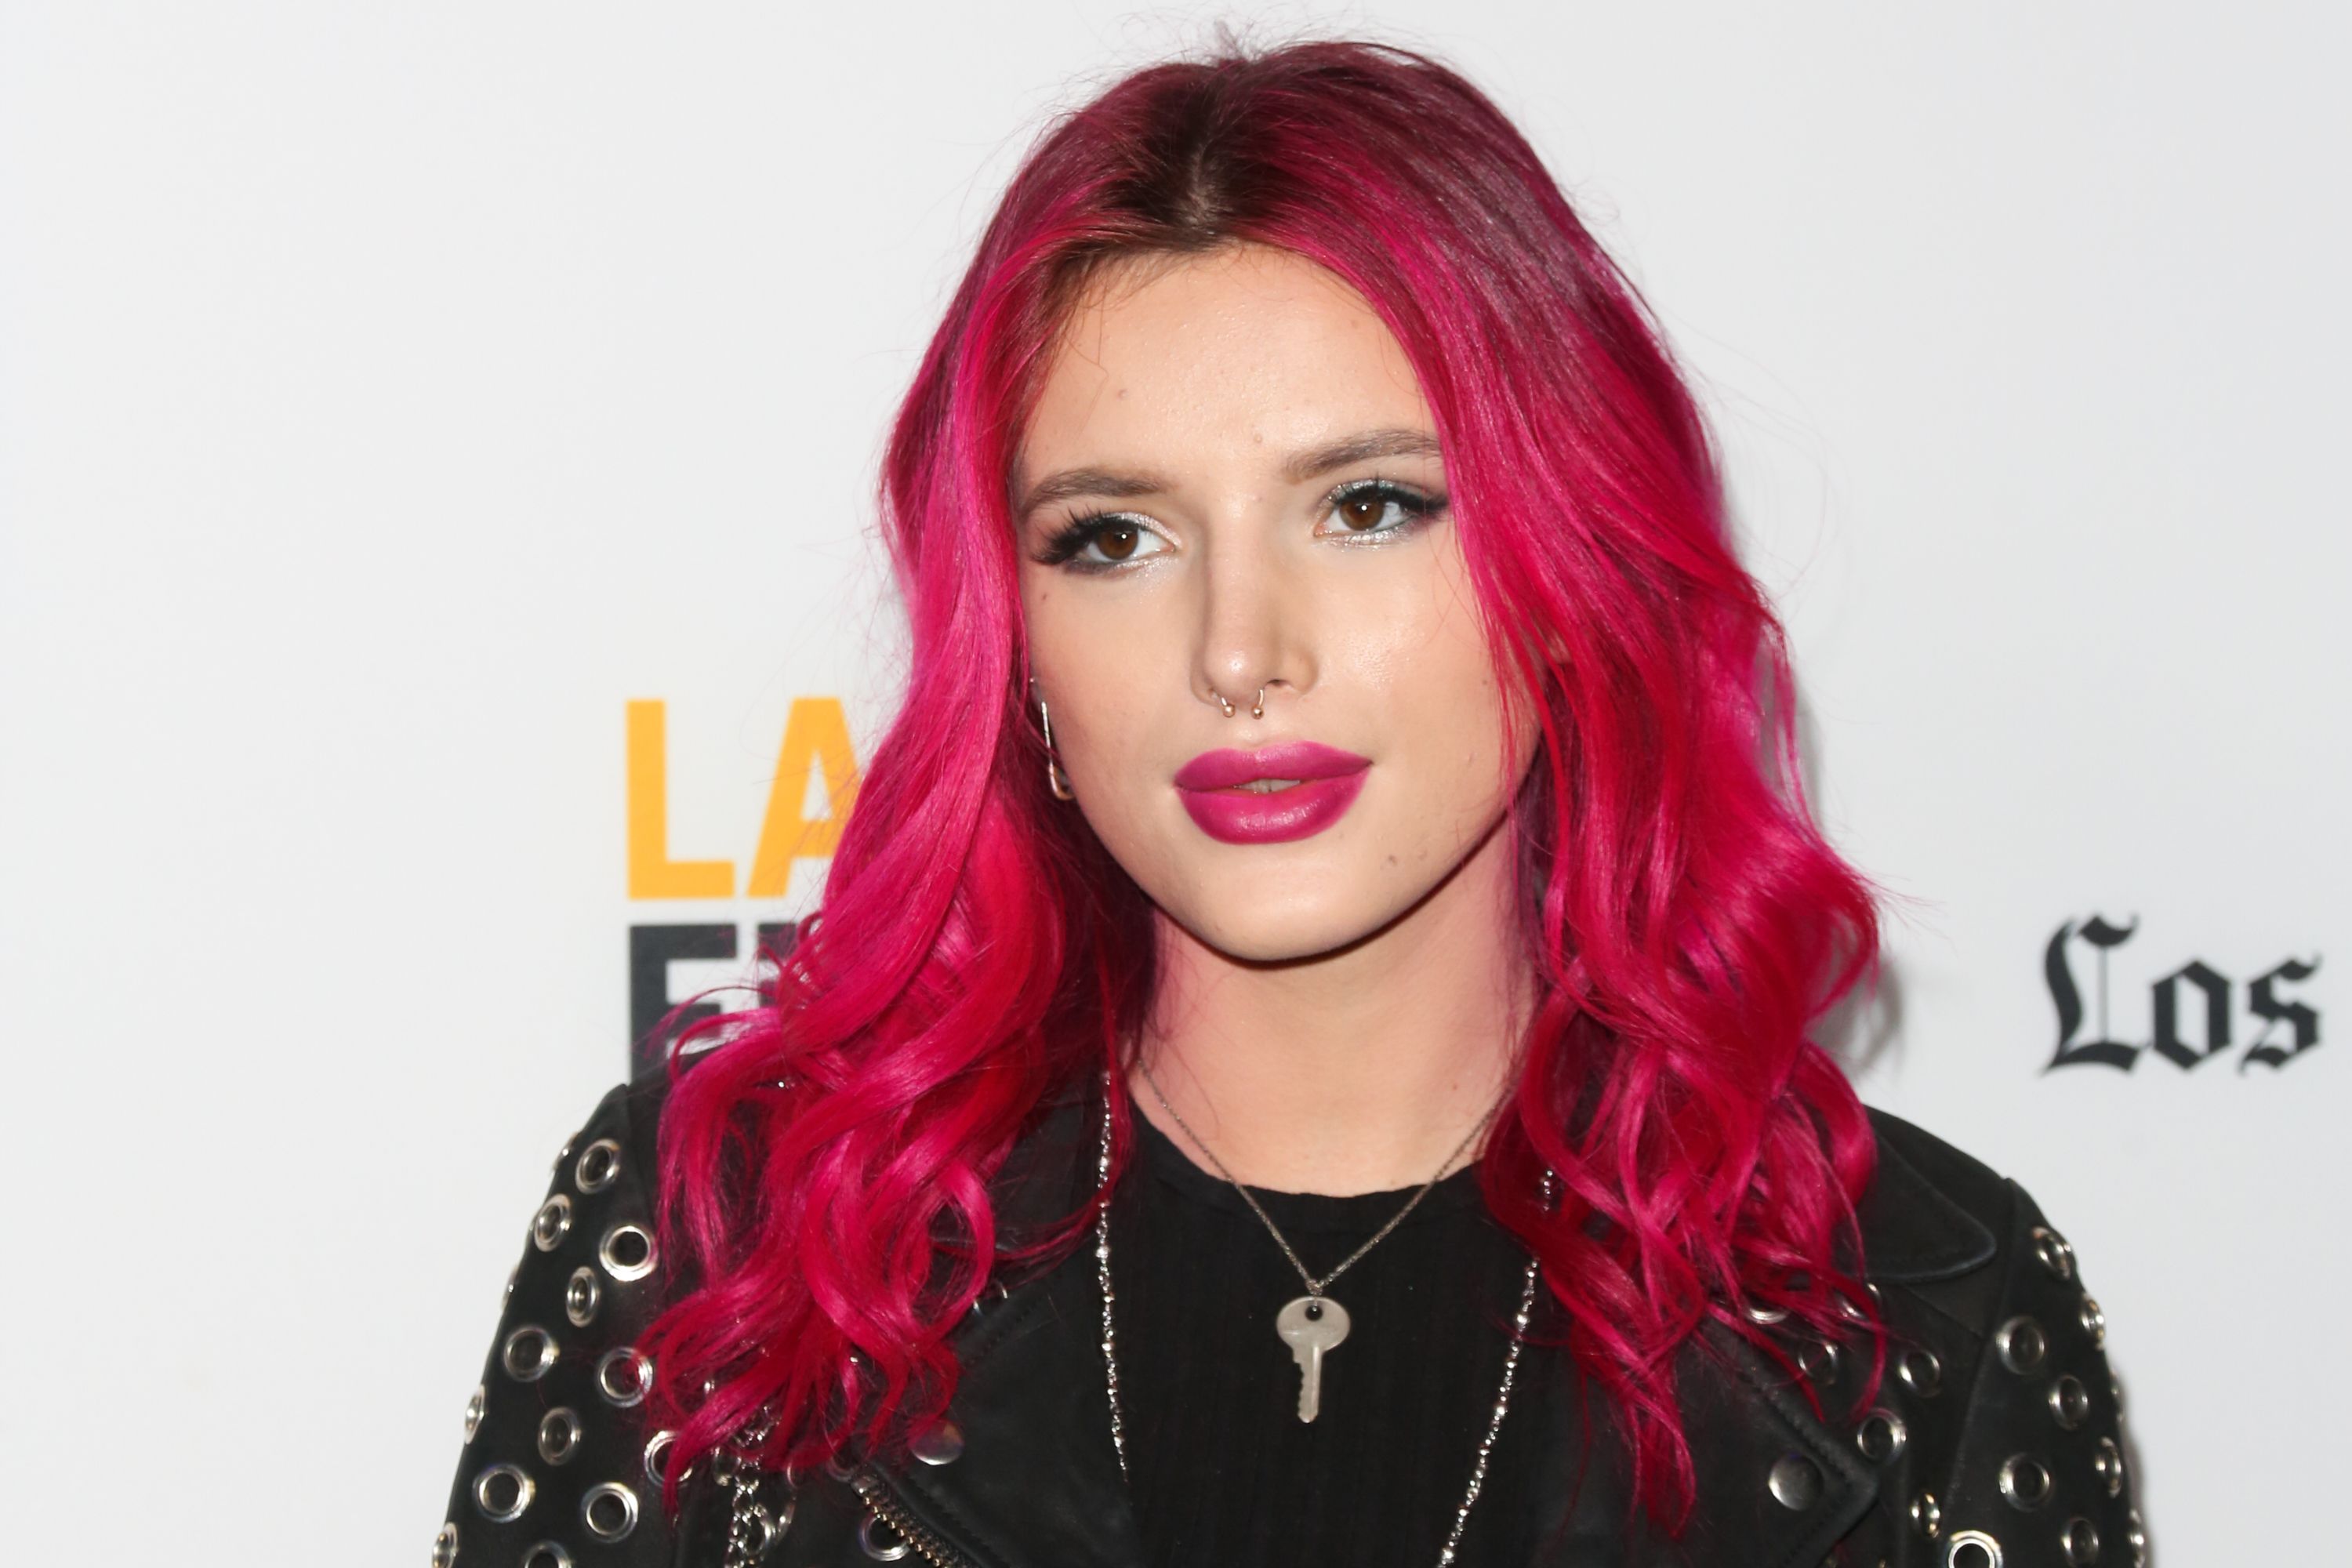 Bella Thorne Insisted on Making One Major Feminist Change to This 